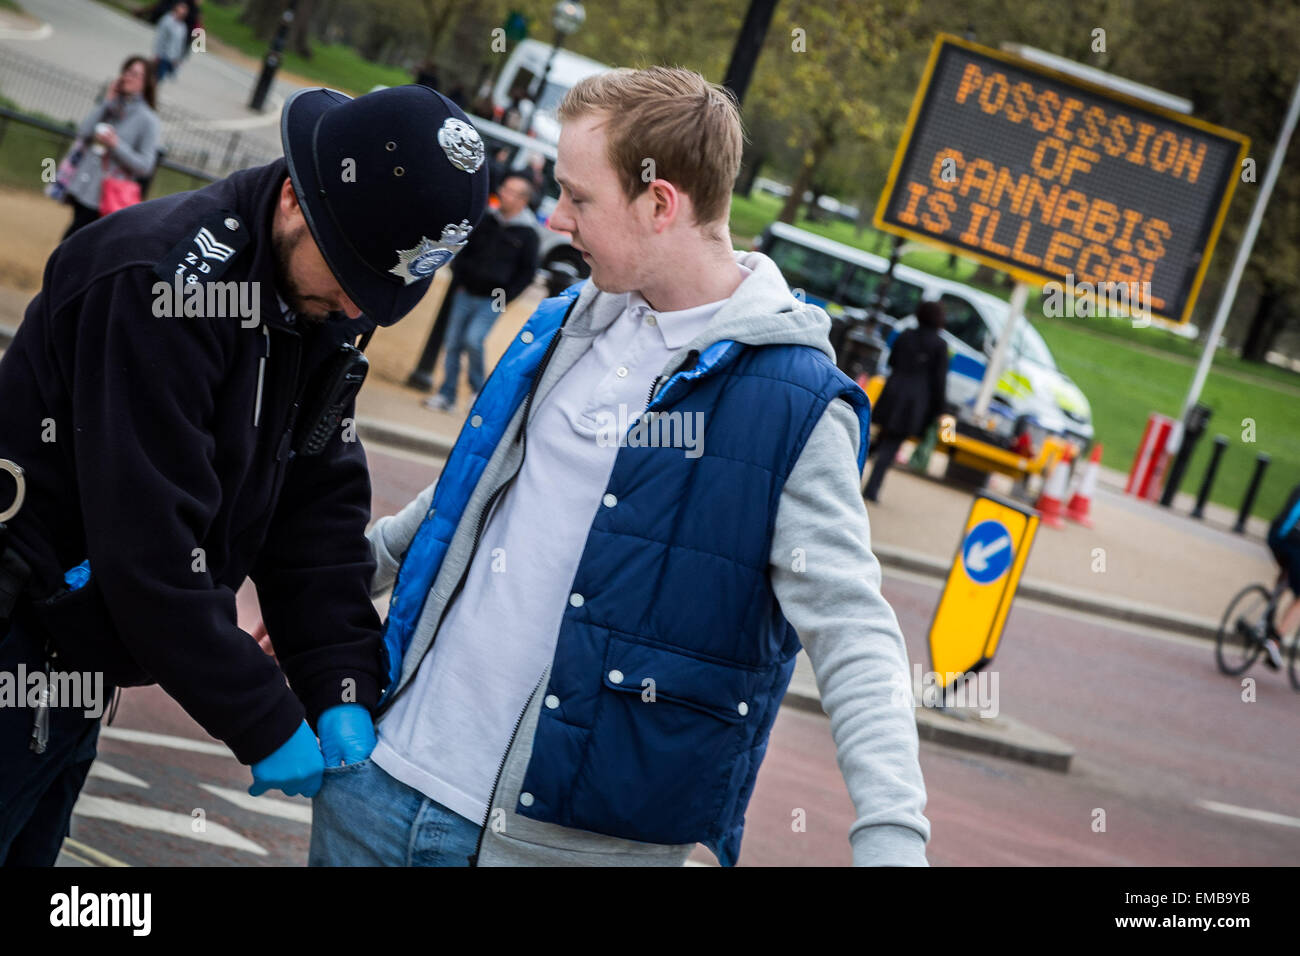 London, UK. 19th April, 2015. Annual 420 Pro Cannabis Rally in Hyde Park Credit: Guy Corbishley/Alamy Live News Stock Photo